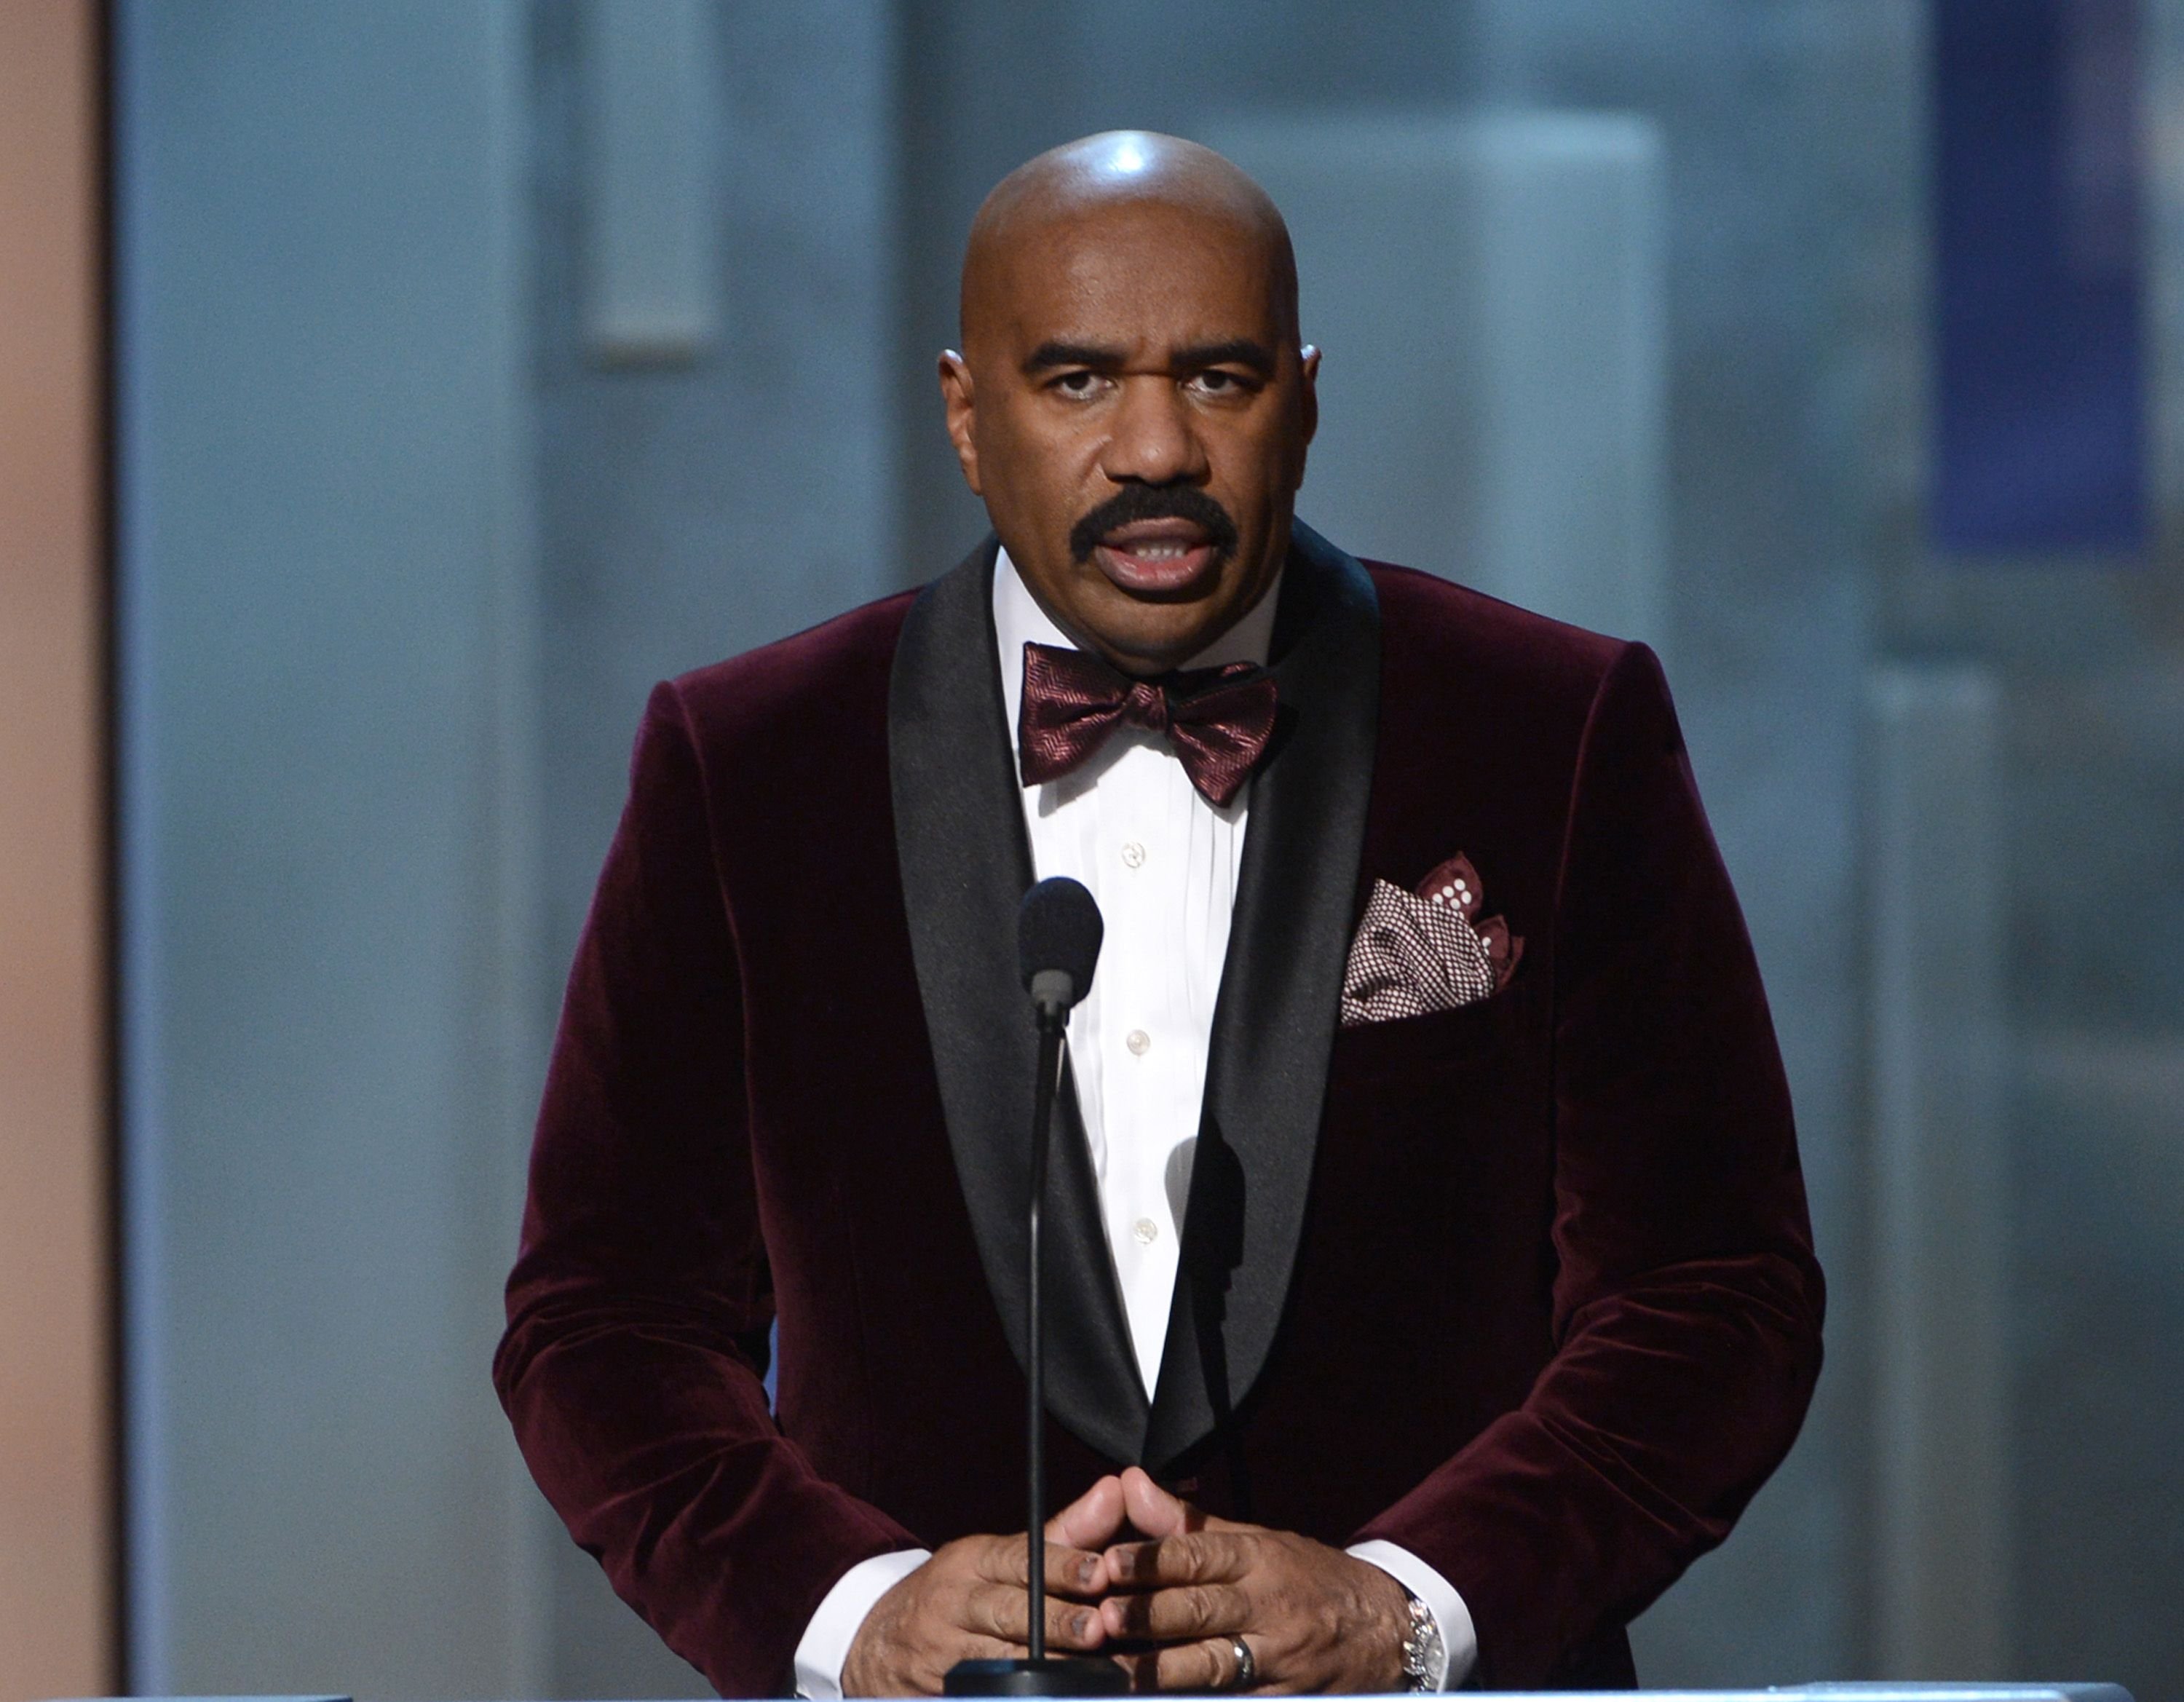 Steve Harvey at the 44th NAACP Image Awards in 2013 in Los Angeles | Source: Getty Images